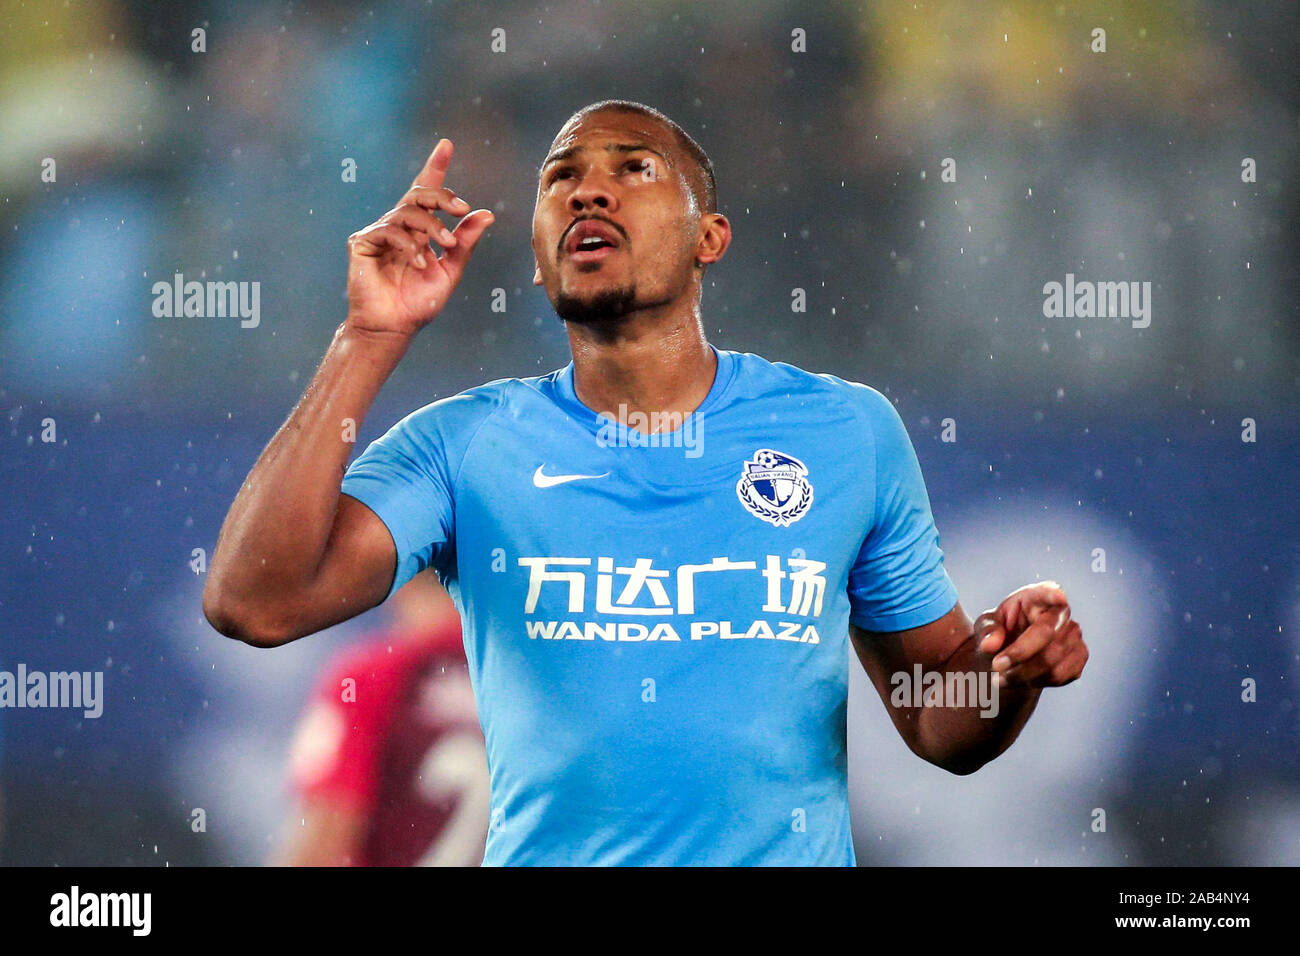 Venezuelan football player Salomon Rondon of Dalian Yifang F.C. celebrates  after scoring during the 28th round match of Chinese Football Association  Super League (CSL) against Hebei China Fortune in Dalian city, northeast